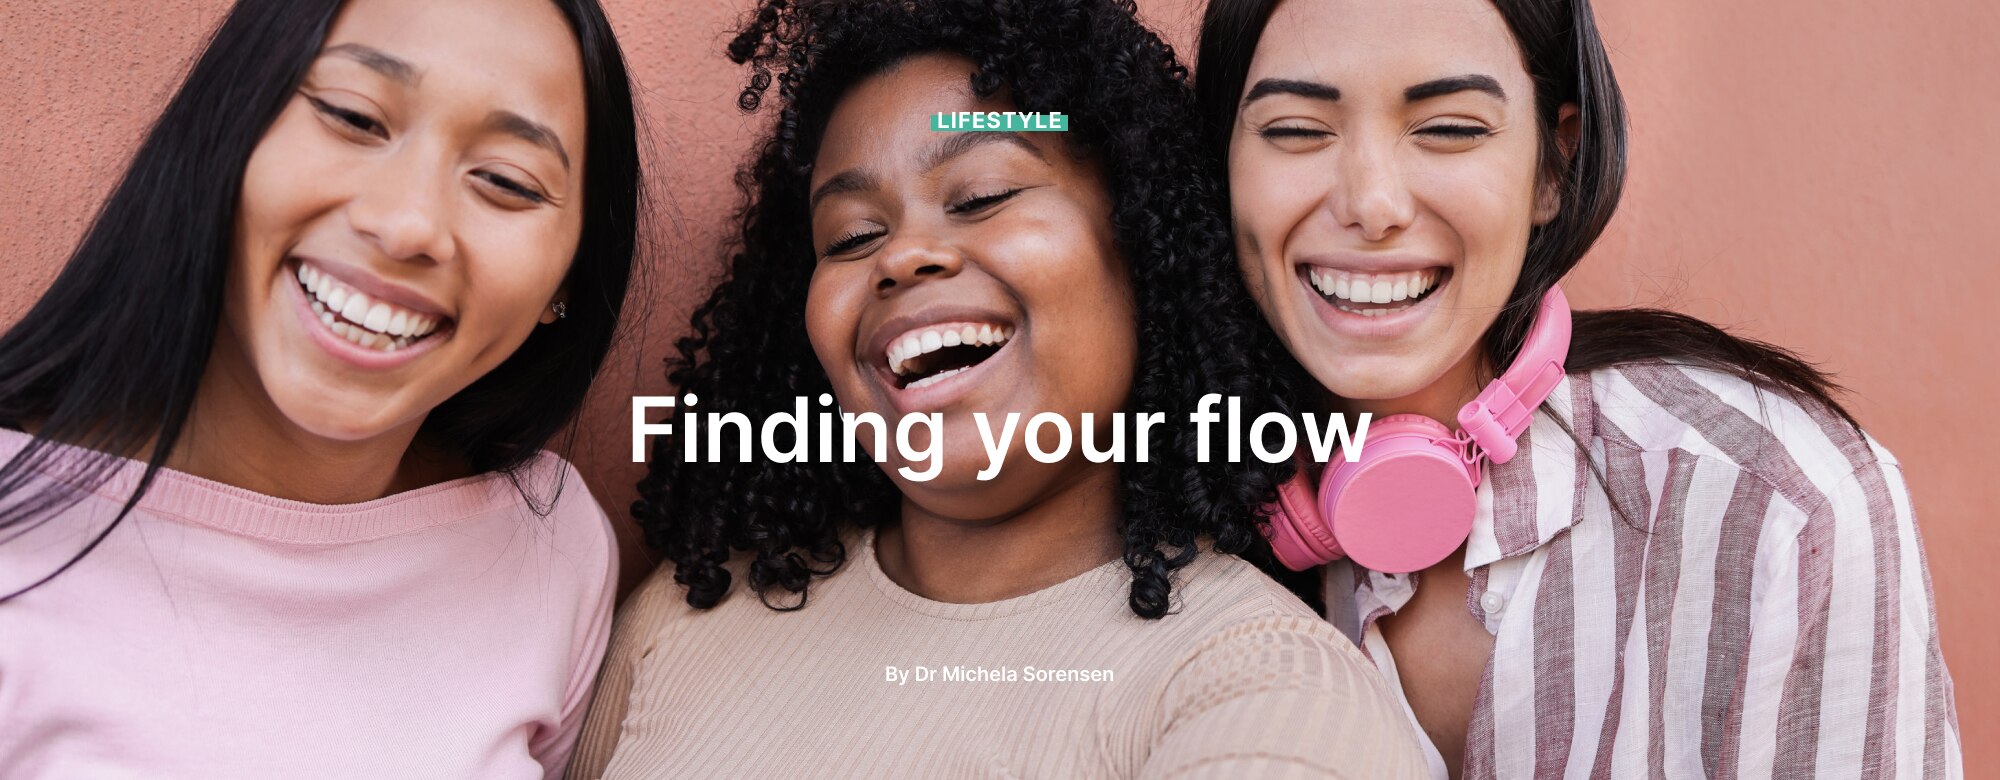 Finding your flow